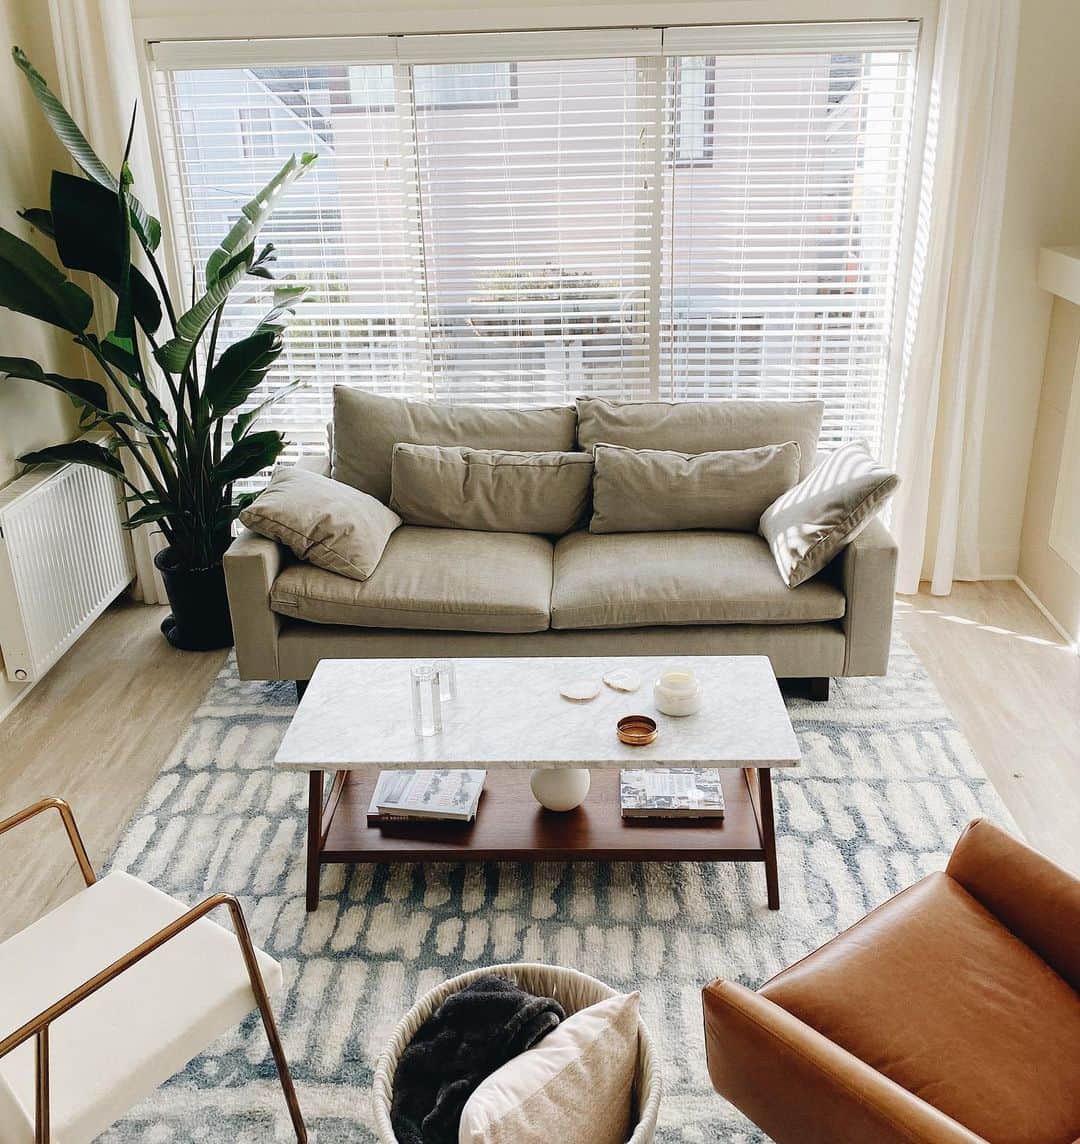 Monica Churchのインスタグラム：「Welcome to my home 🤗 sooo happy with how my living room has turned out! Found this awesome mid century coffee table from a @facebookmarketplace seller here in Seattle. My house tour video is now up on my channel, go watch to see how I achieved this #FacebookMarketplaceMakeover #Ad」